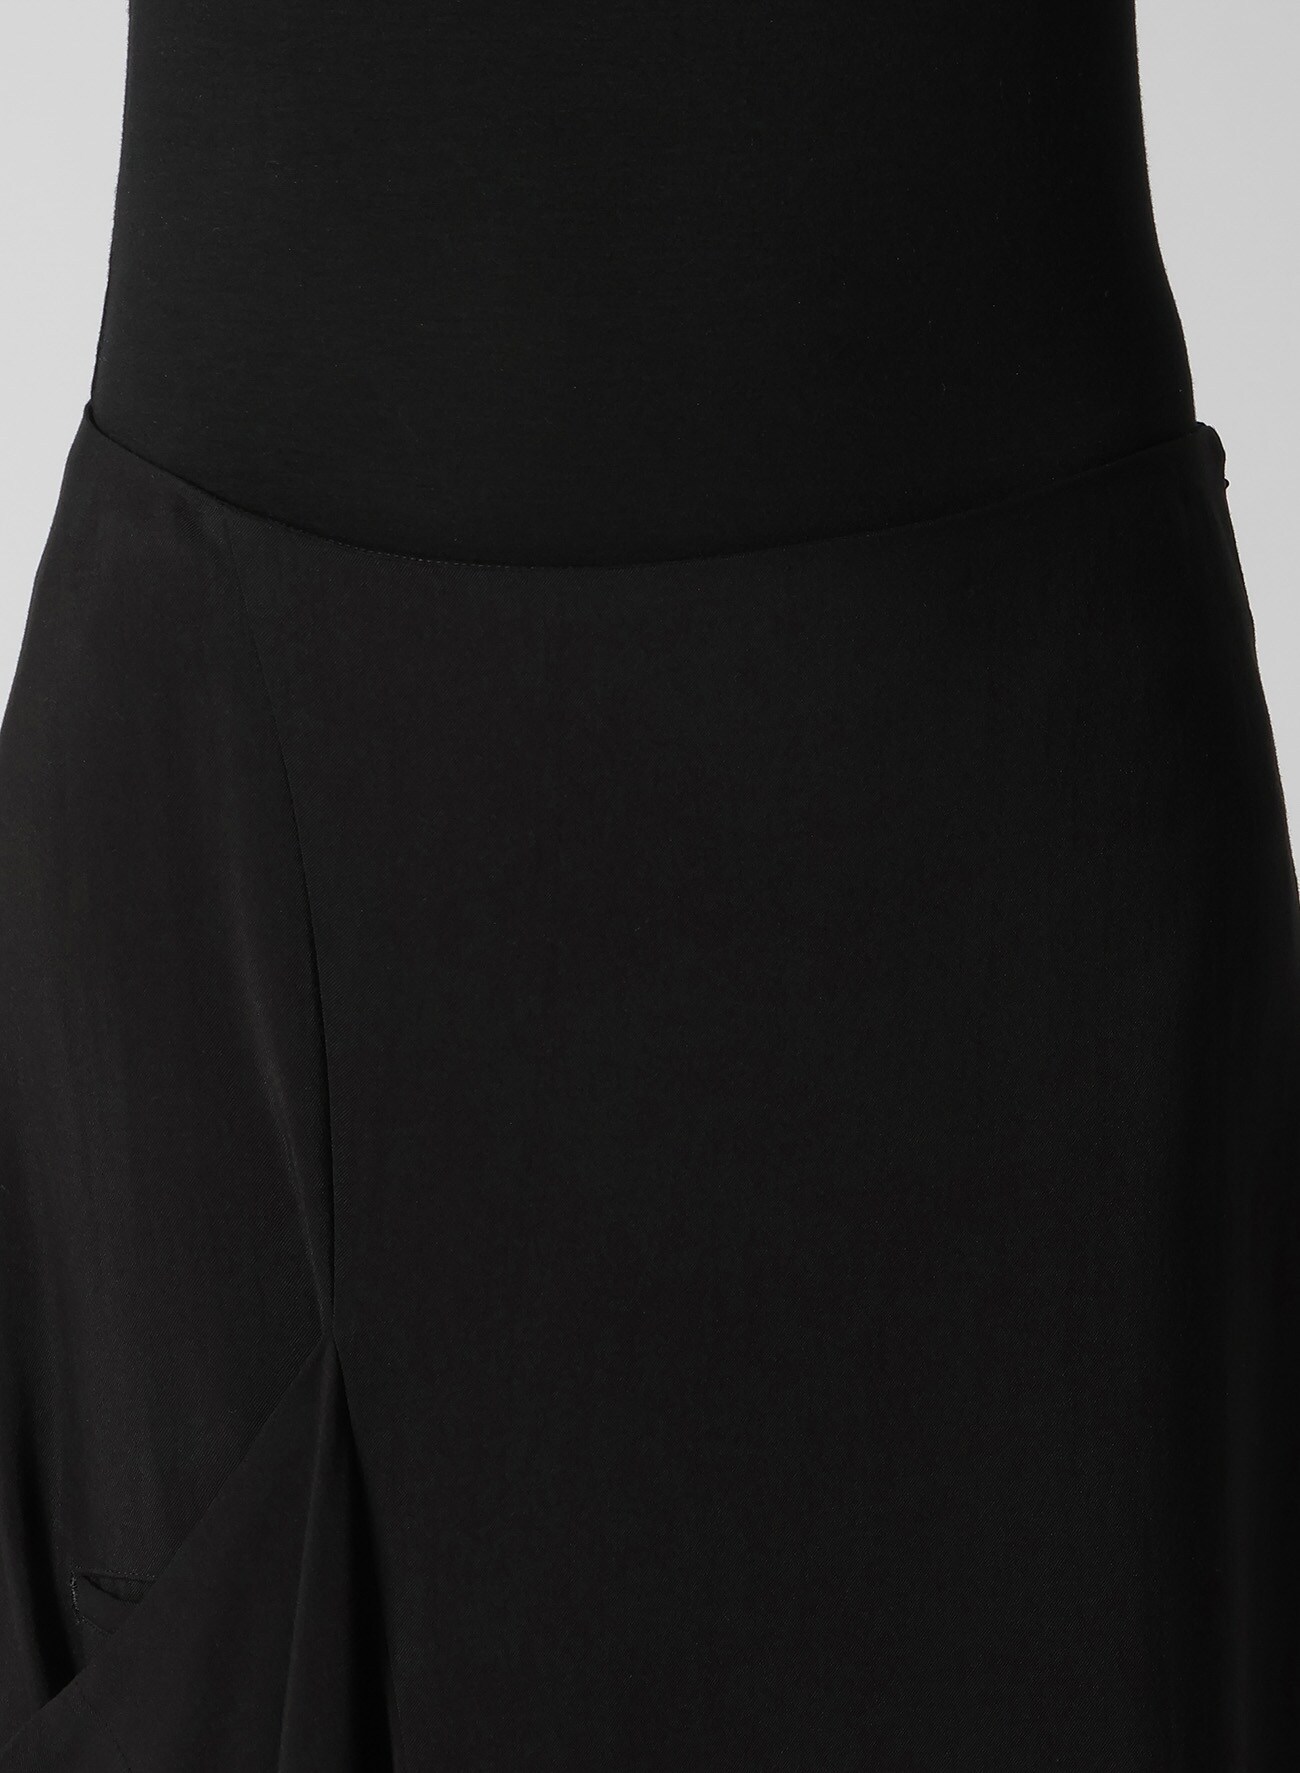 RAYON CUPRO RIGHT SIDE MARMAID FLARE SKIRT